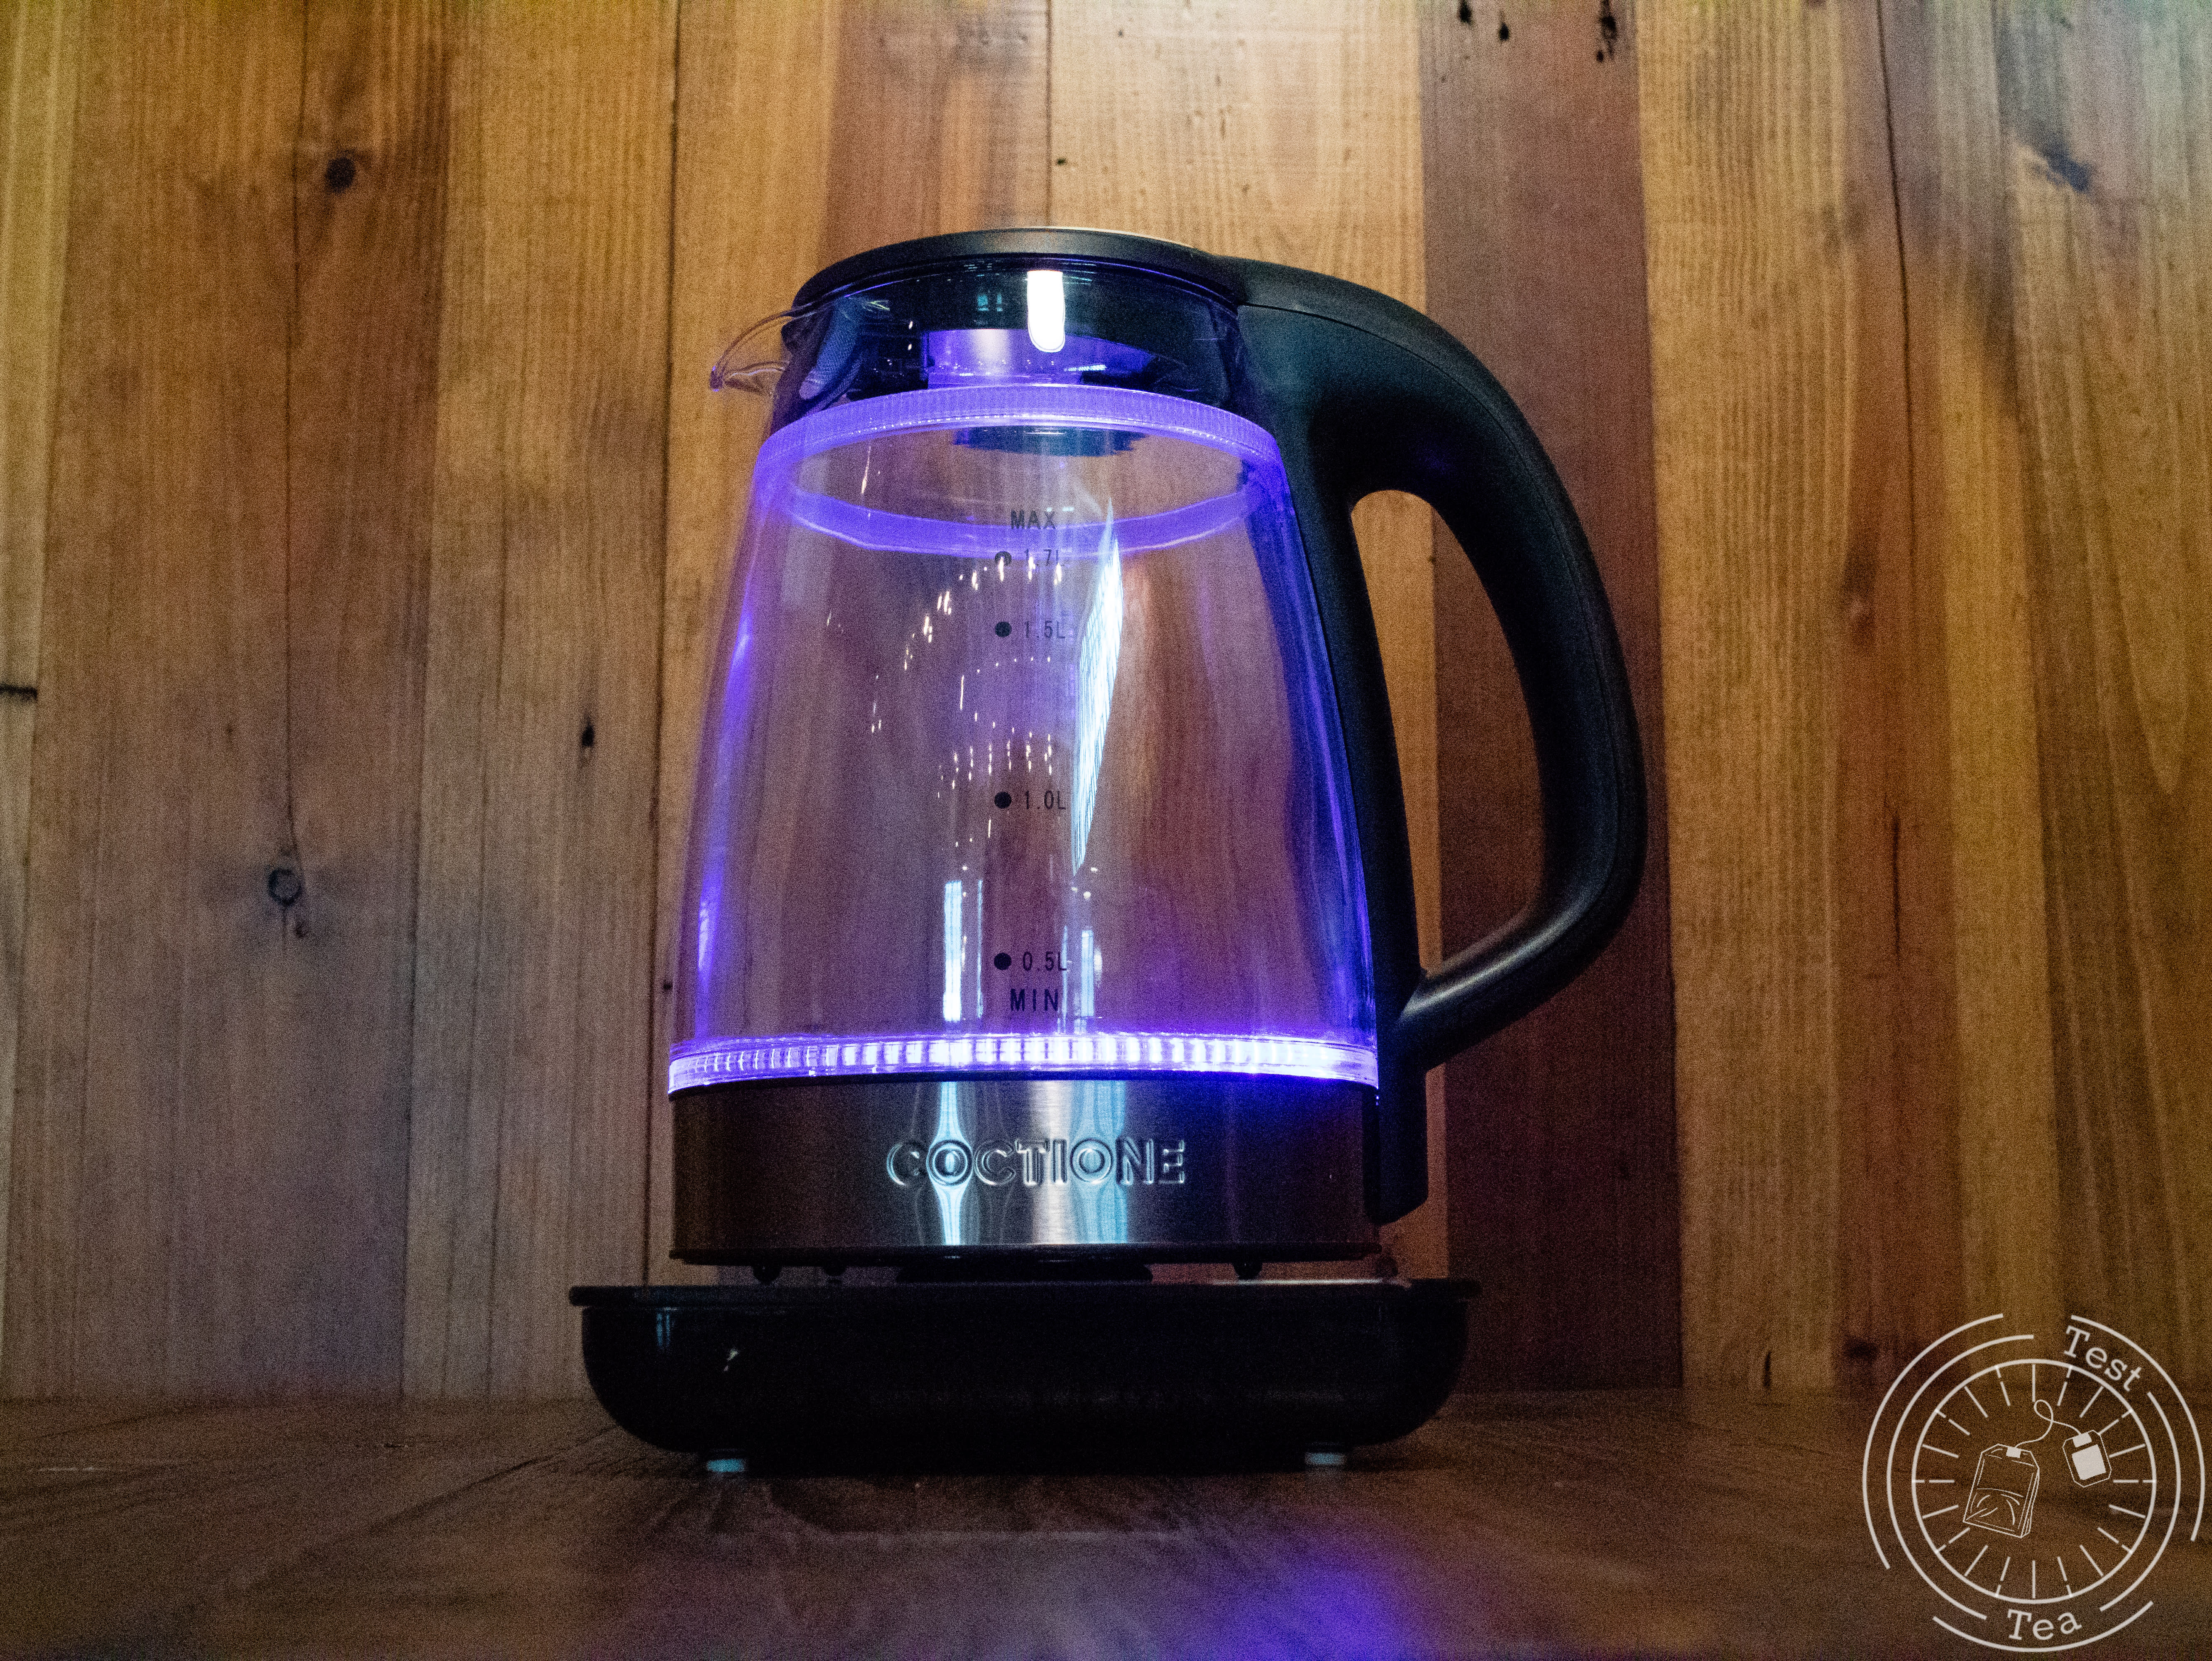 Coctione Electric Water Boiler Kettle Review 